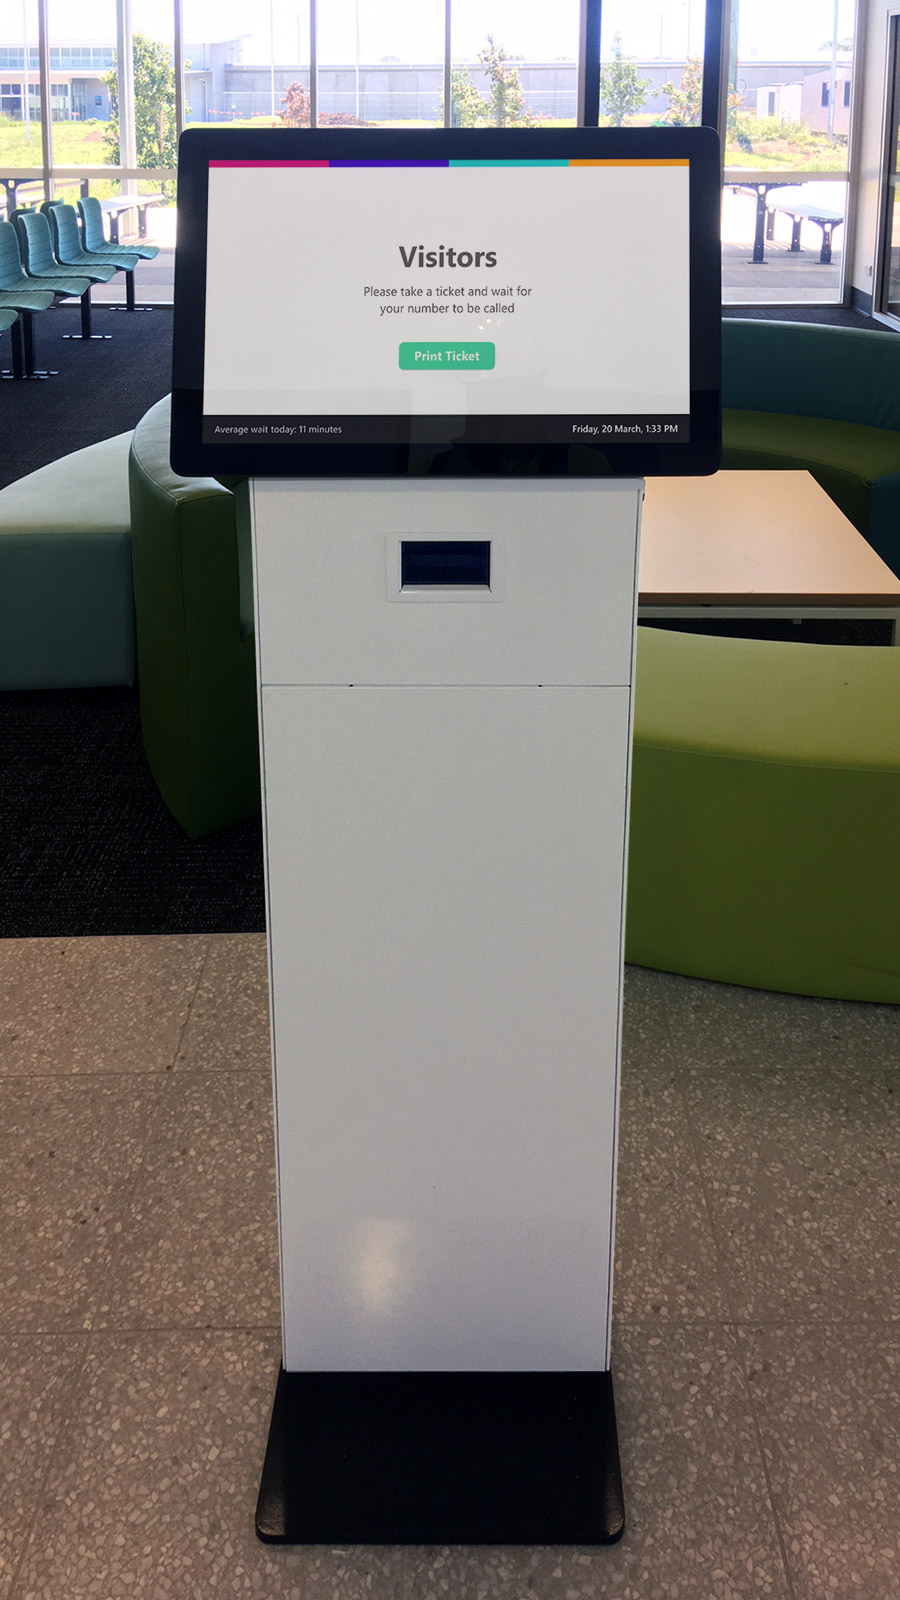 The kiosk was left unbranded to ensure it doesn’t draw attention away from other way-finding signage in the facility (which is tightly controlled). Photo courtesy Fredon Technology